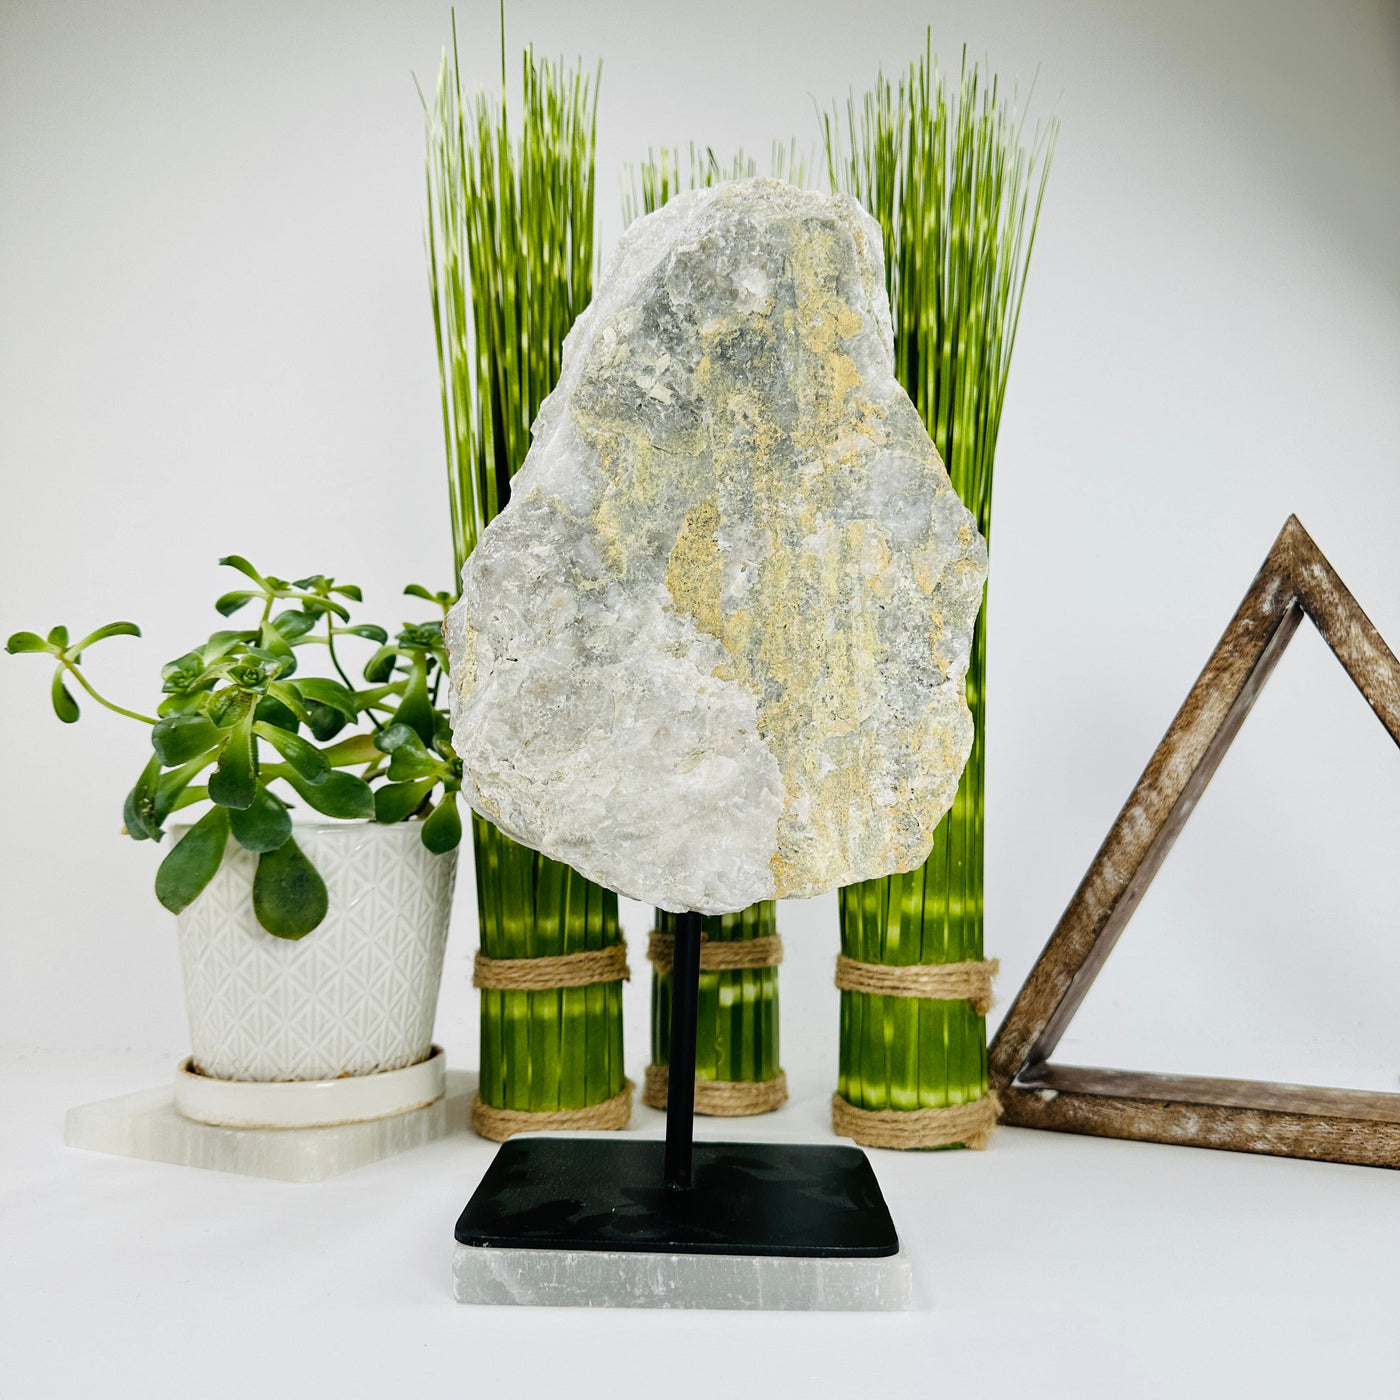 crystal quartz with sugar druzy on metal stand with decorations in the background